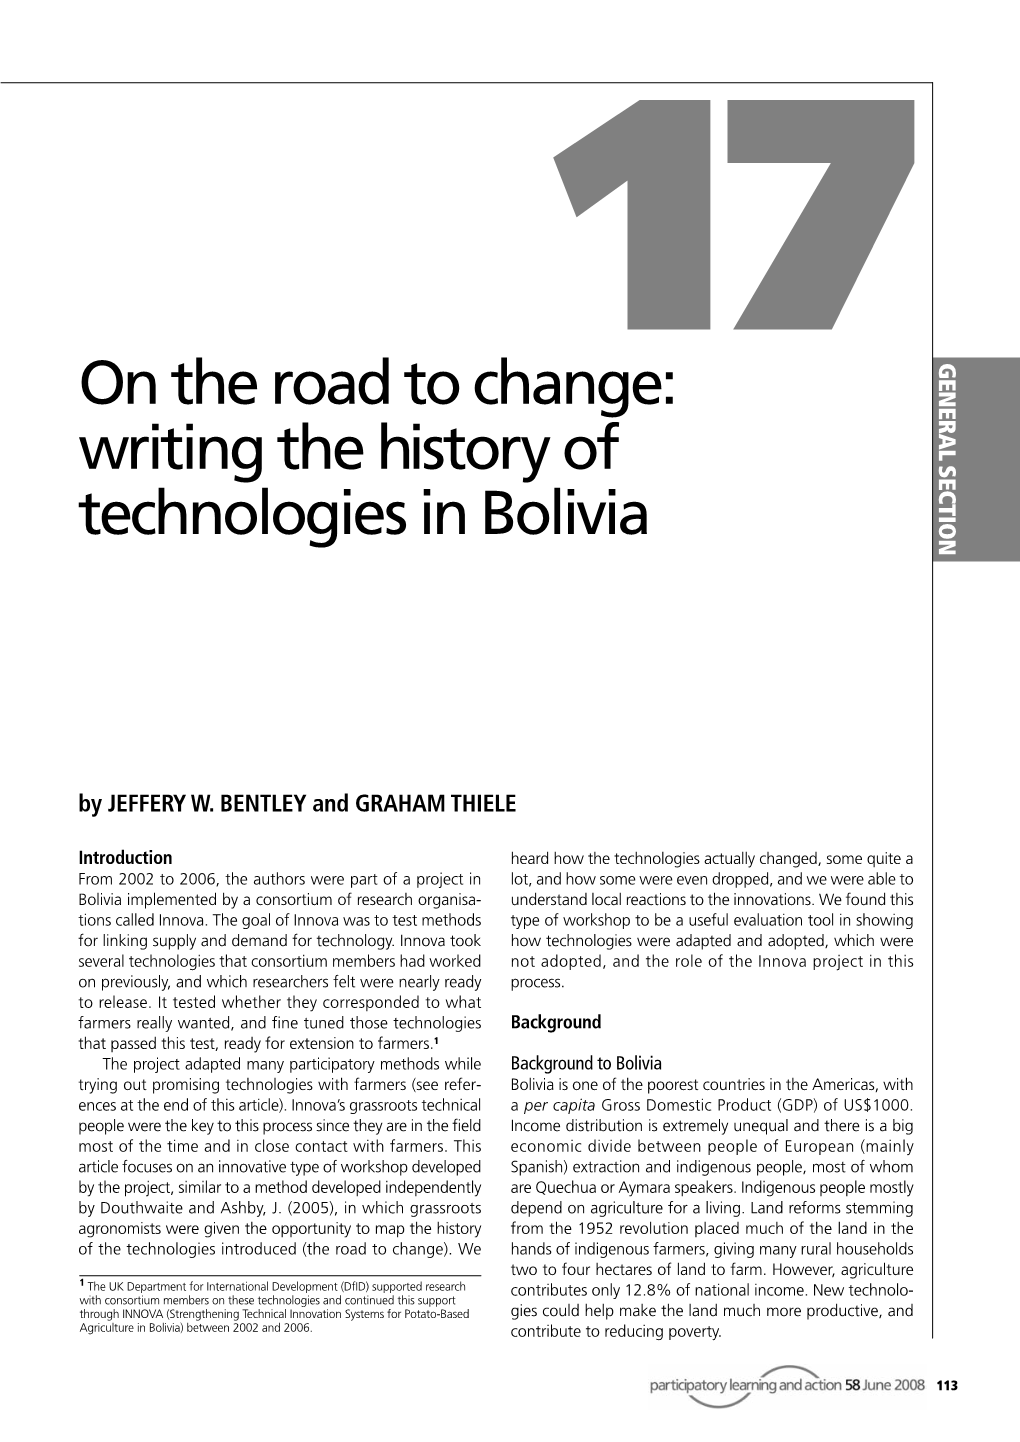 On the Road to Change: Writing the History of Technologies in Bolivia